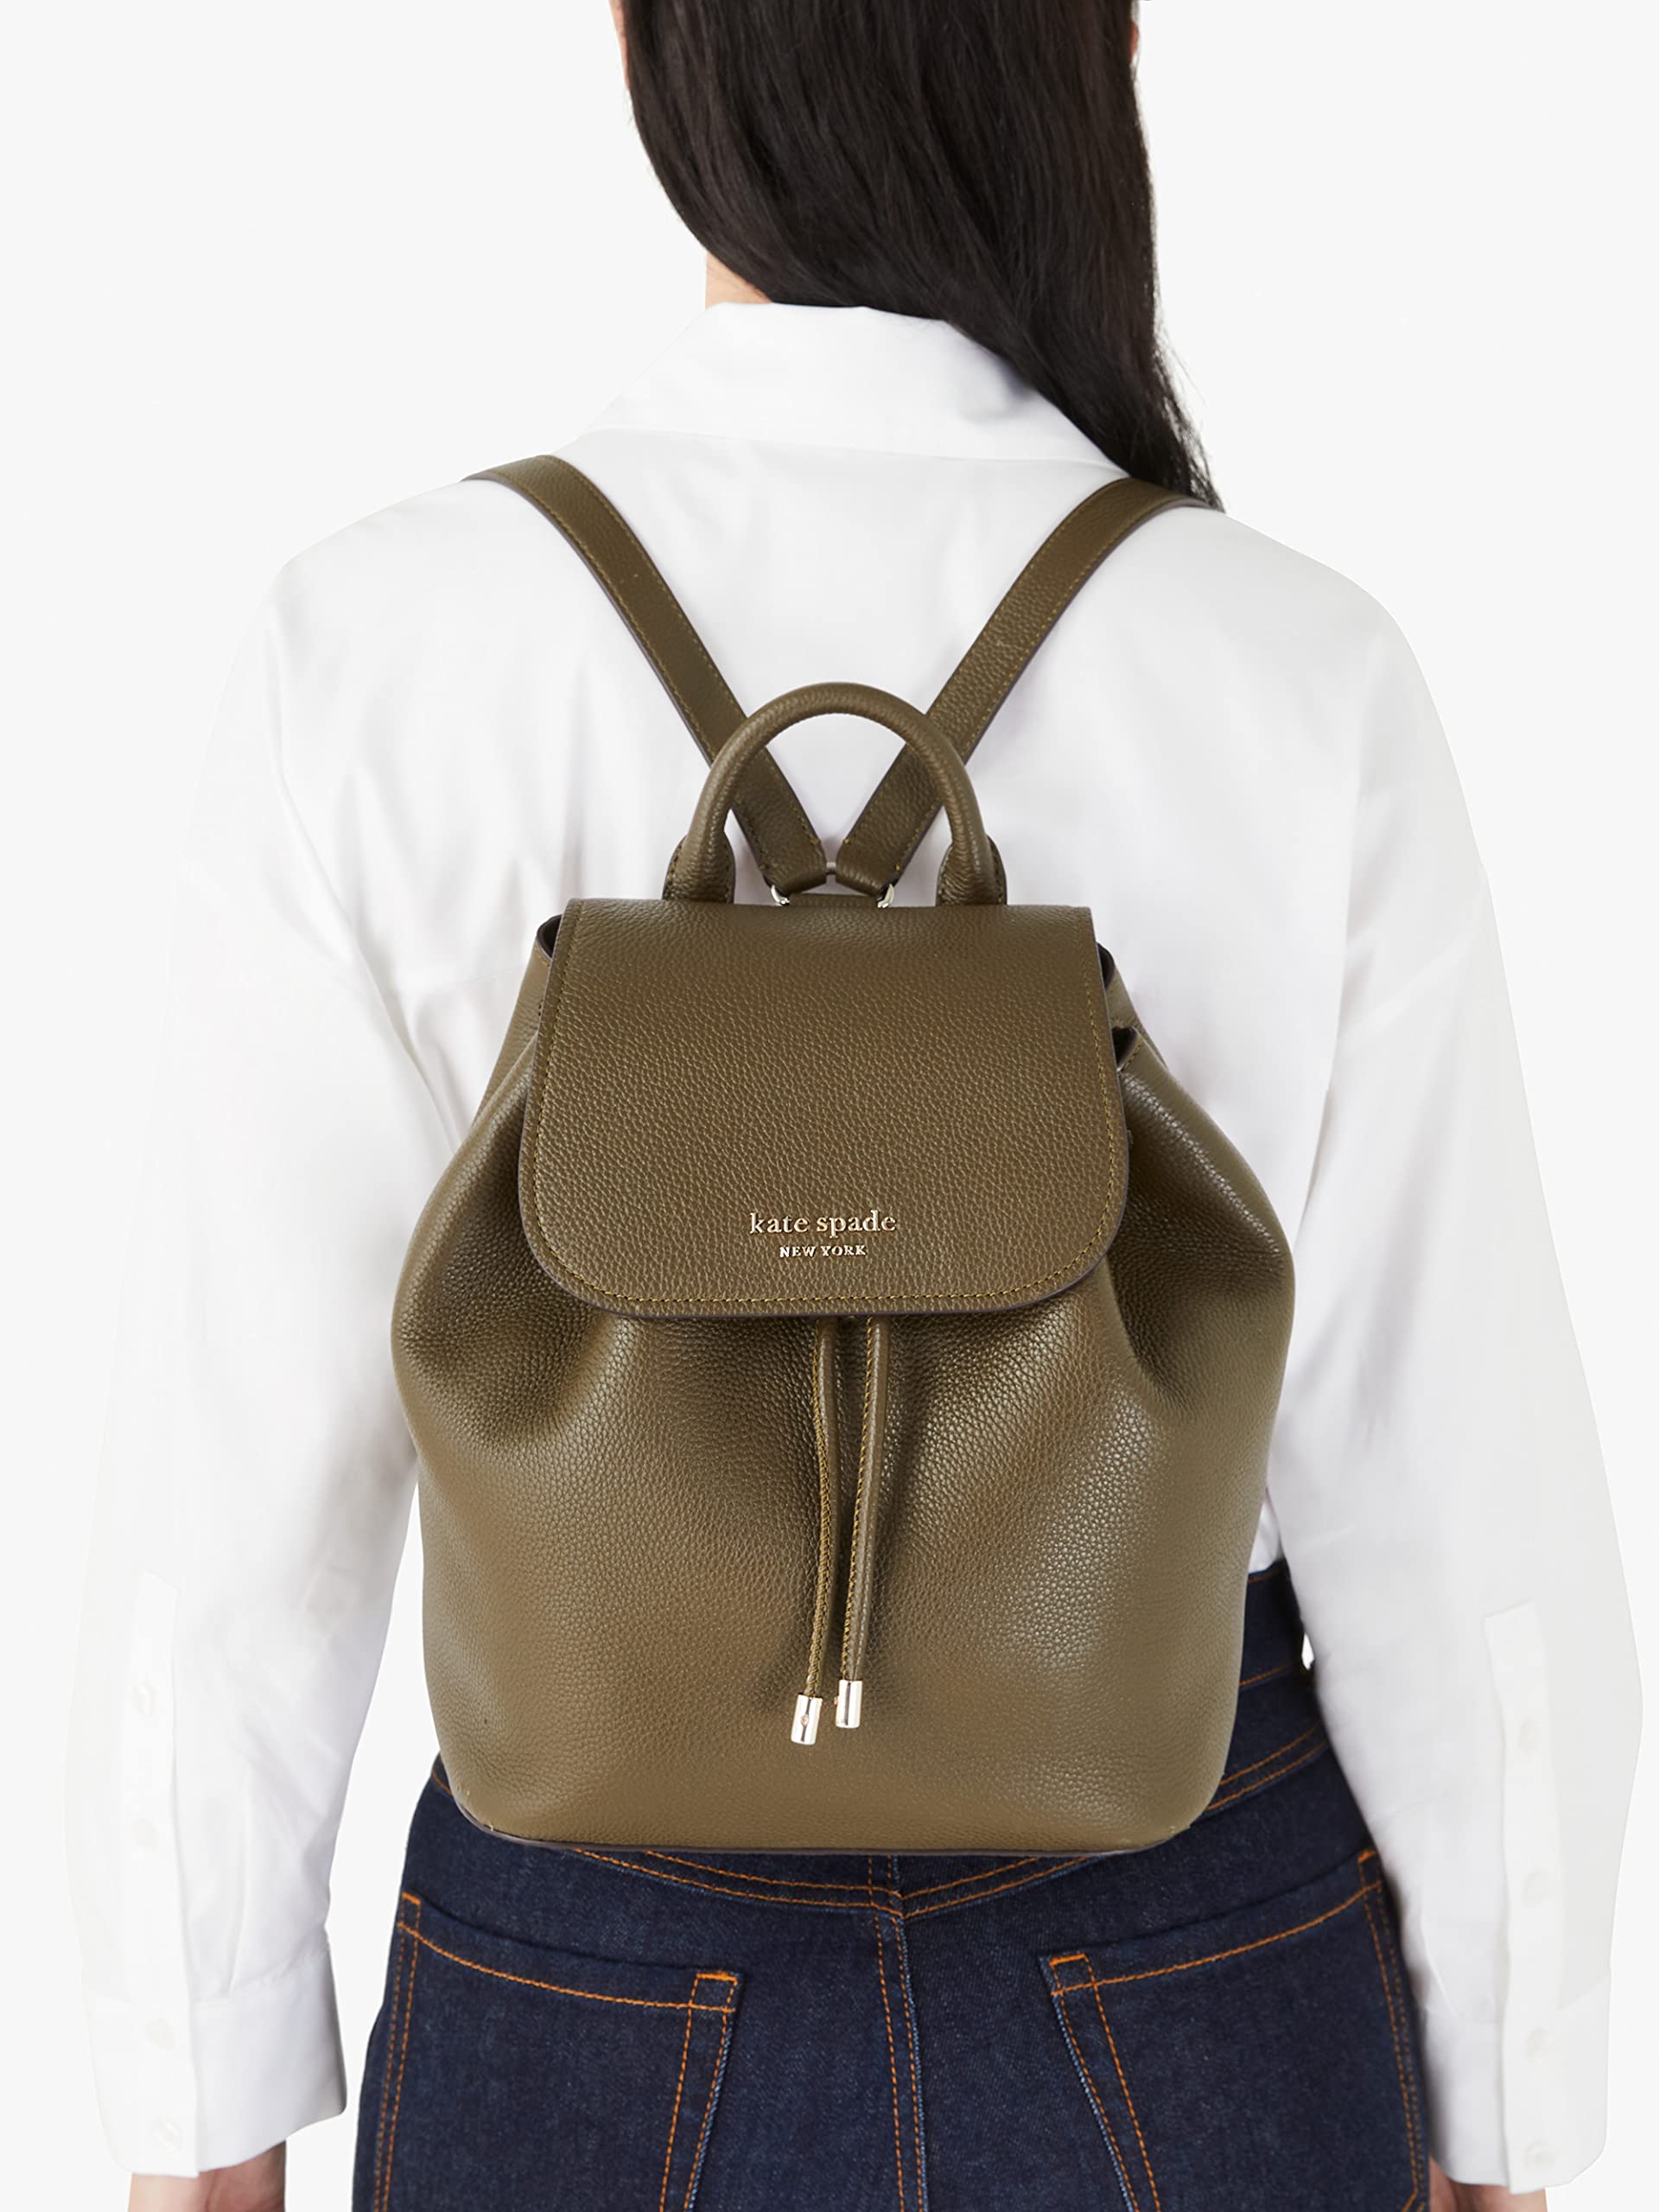 Kate Spade New York Sinch Pebbled Leather Medium Flap Backpack